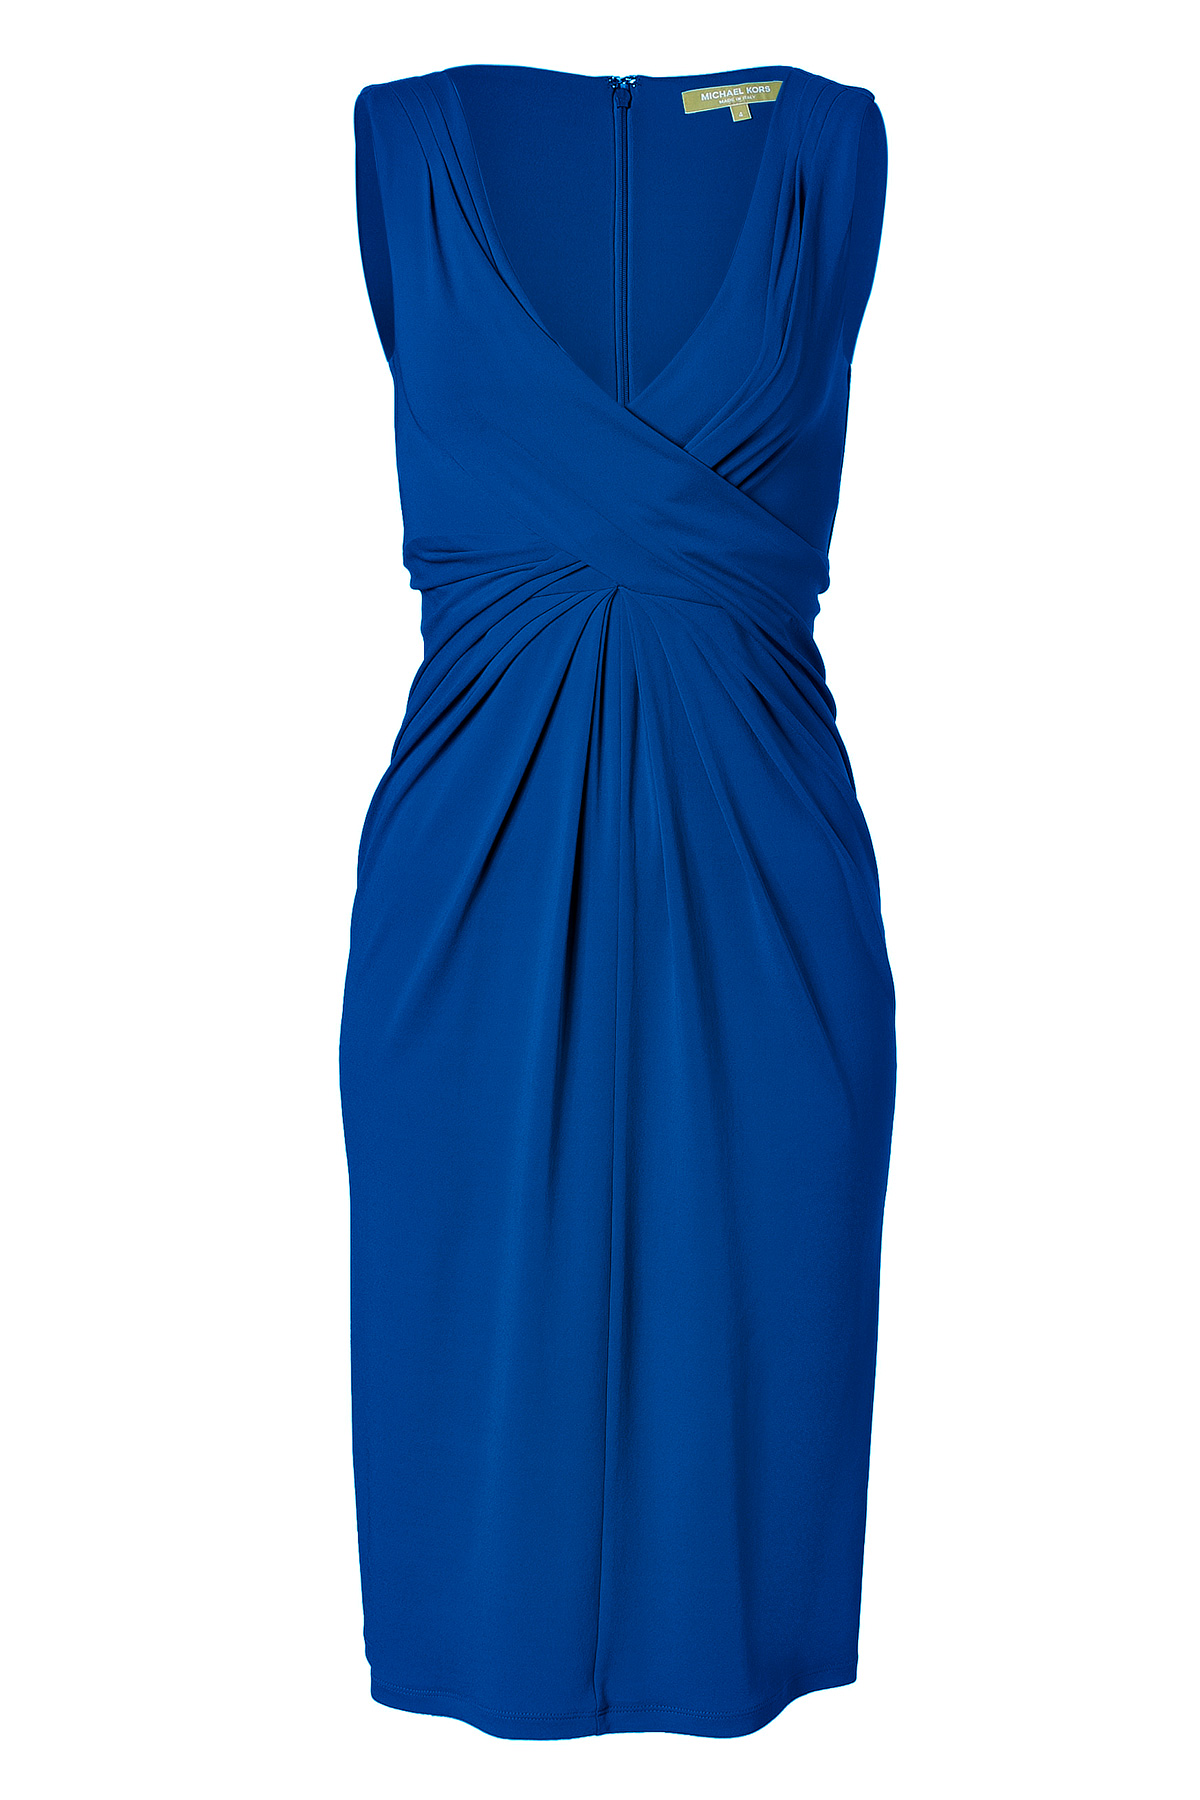 Michael kors Twisted Front Dress in Blue | Lyst